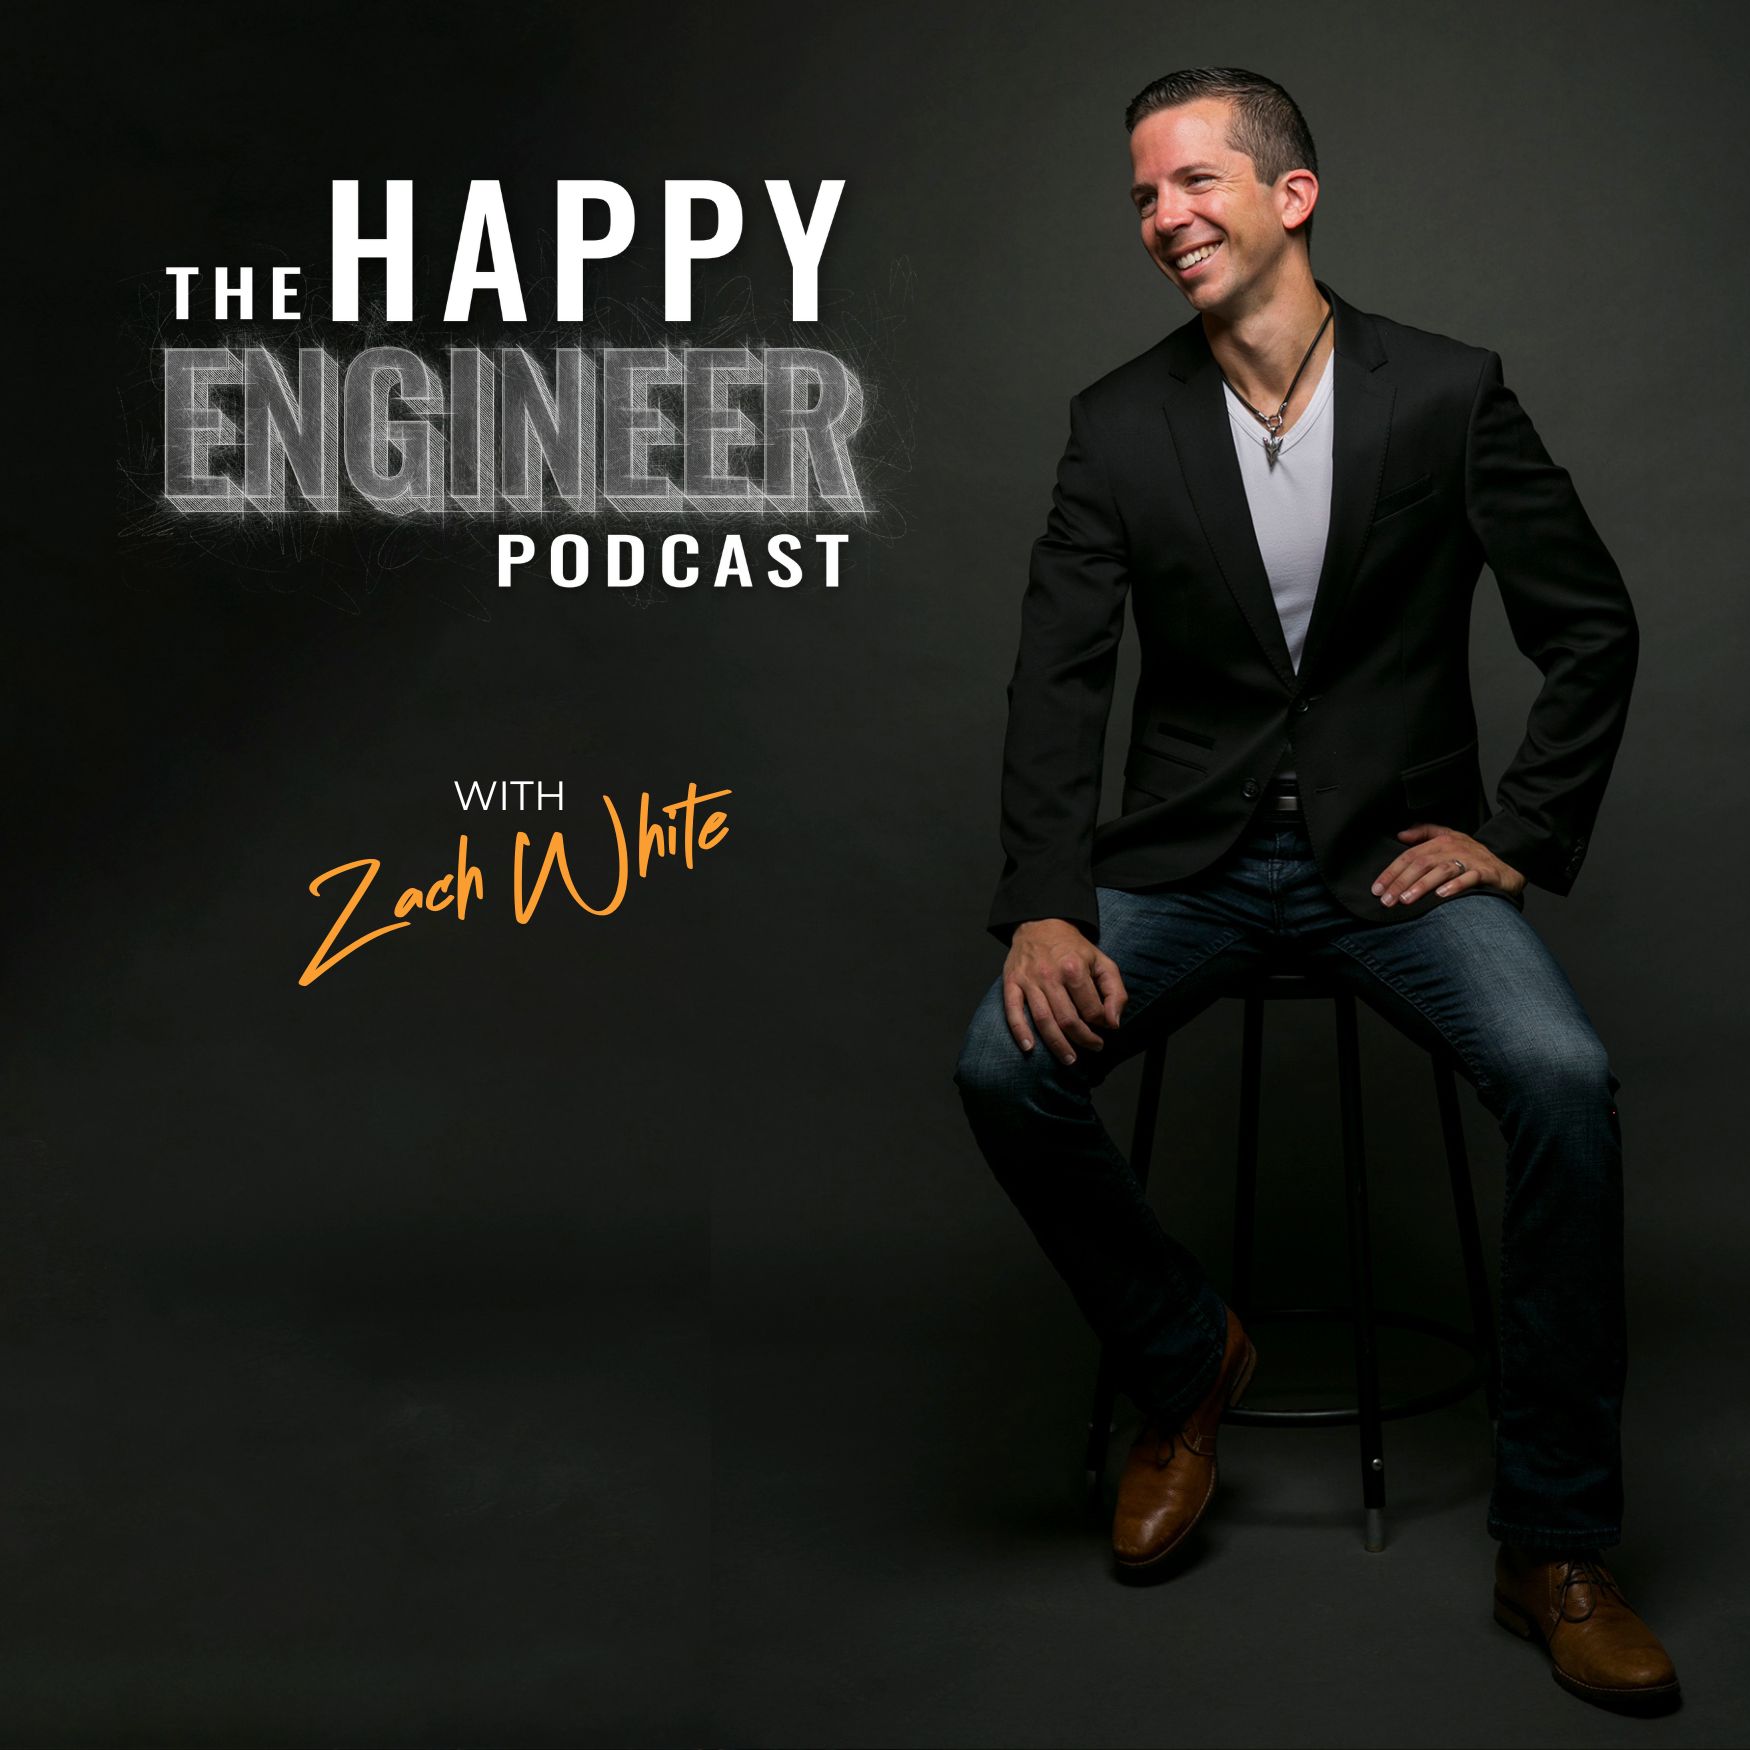 The Happy Engineer Podcast with Host Zach White on Burnout Recovery and Hitting Rock Bottom